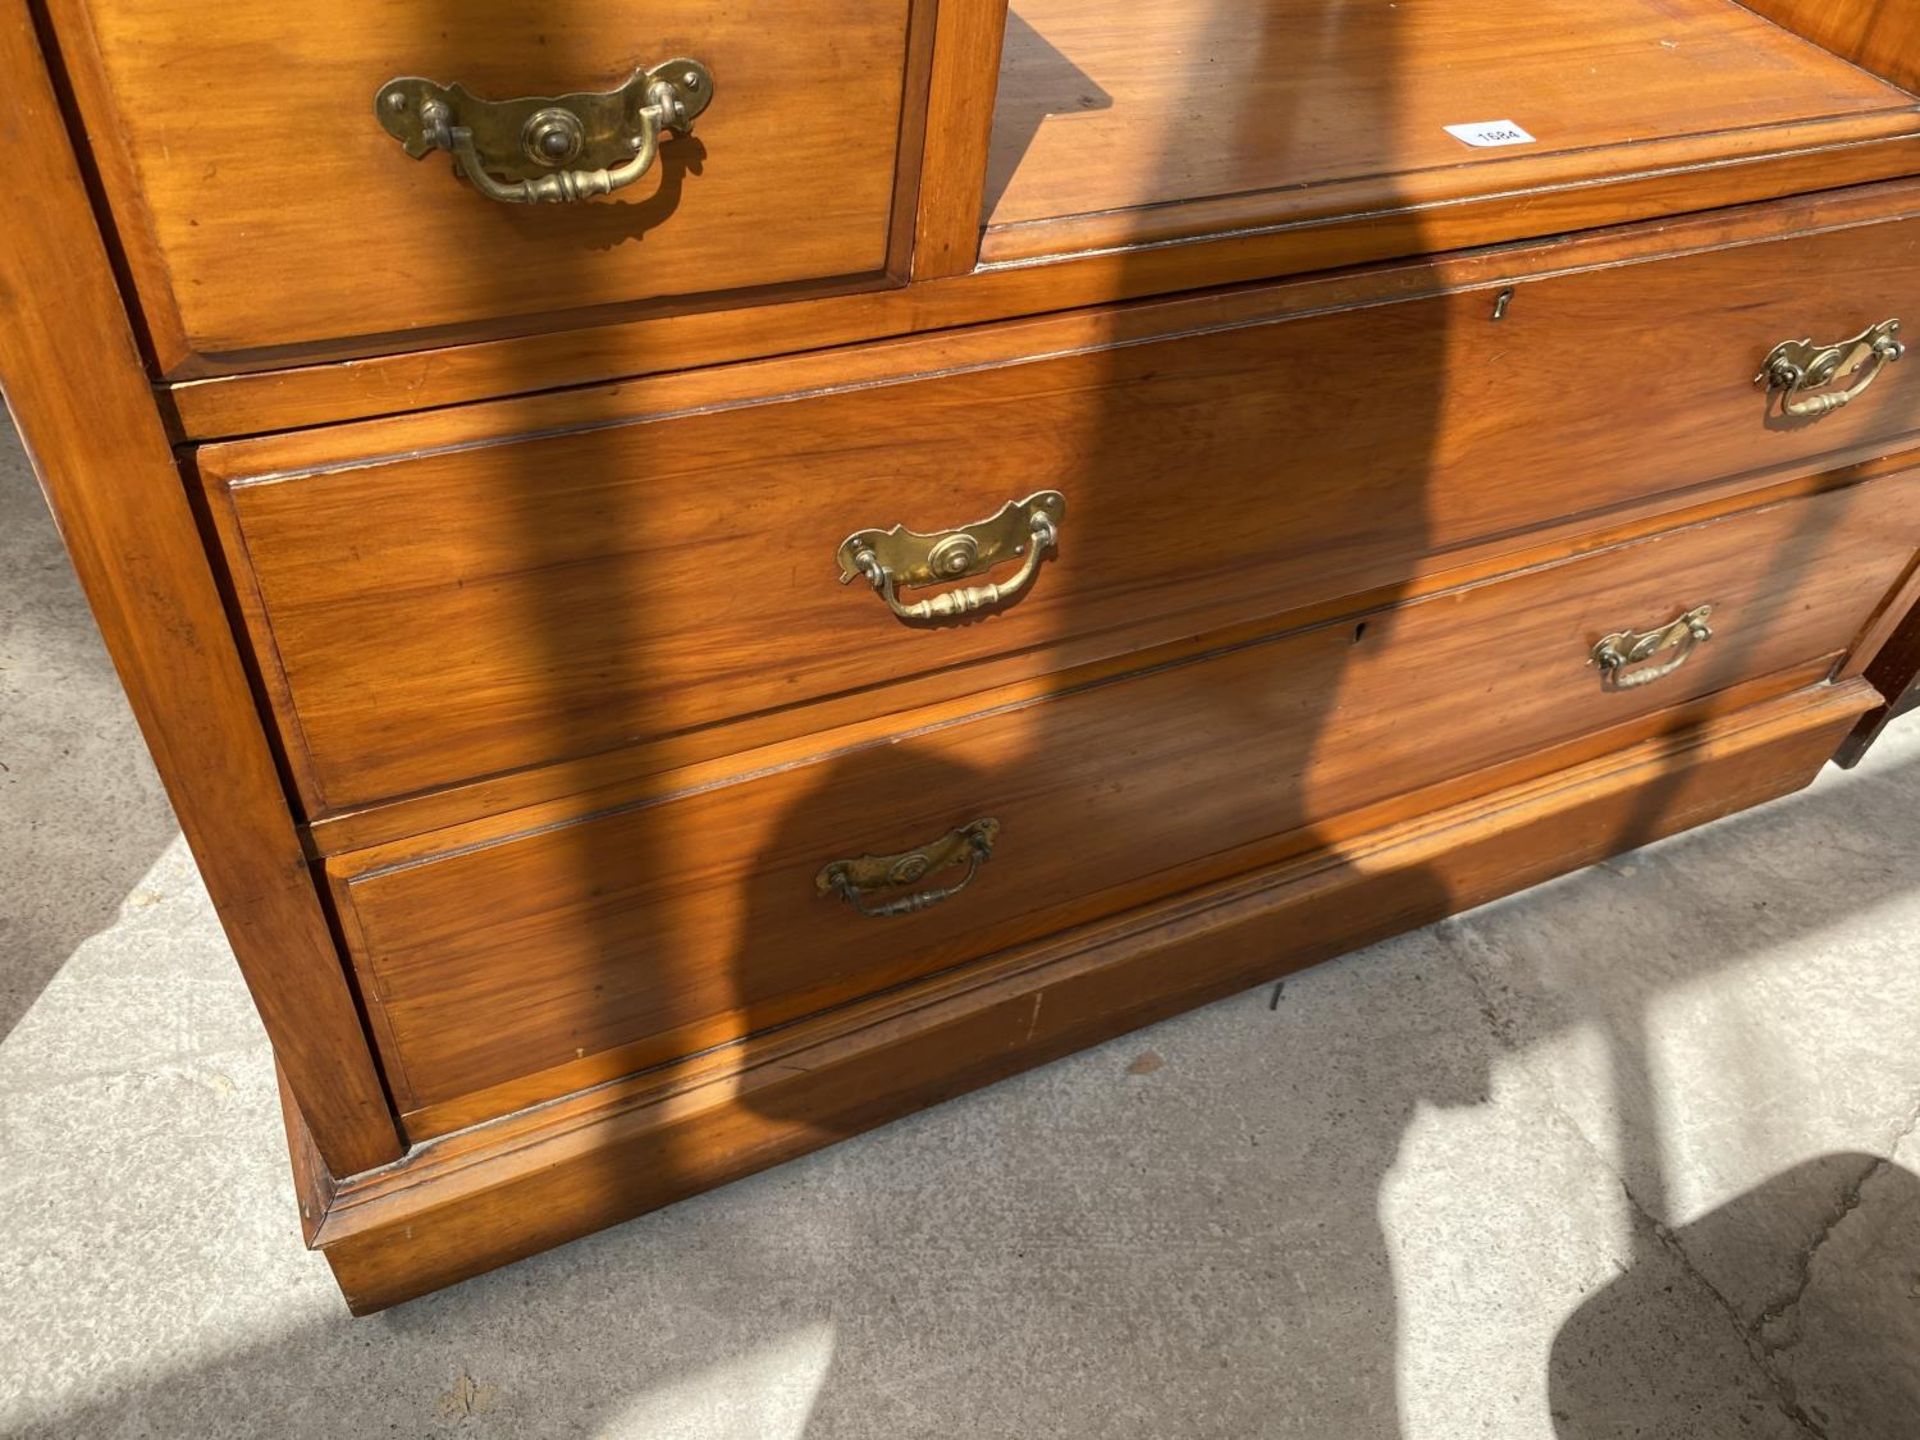 A SATINWOOD DRESSING TABLE WITH FOUR DRAWERS AND UPPER BEVEL EDGE MIRROR - Image 4 of 4